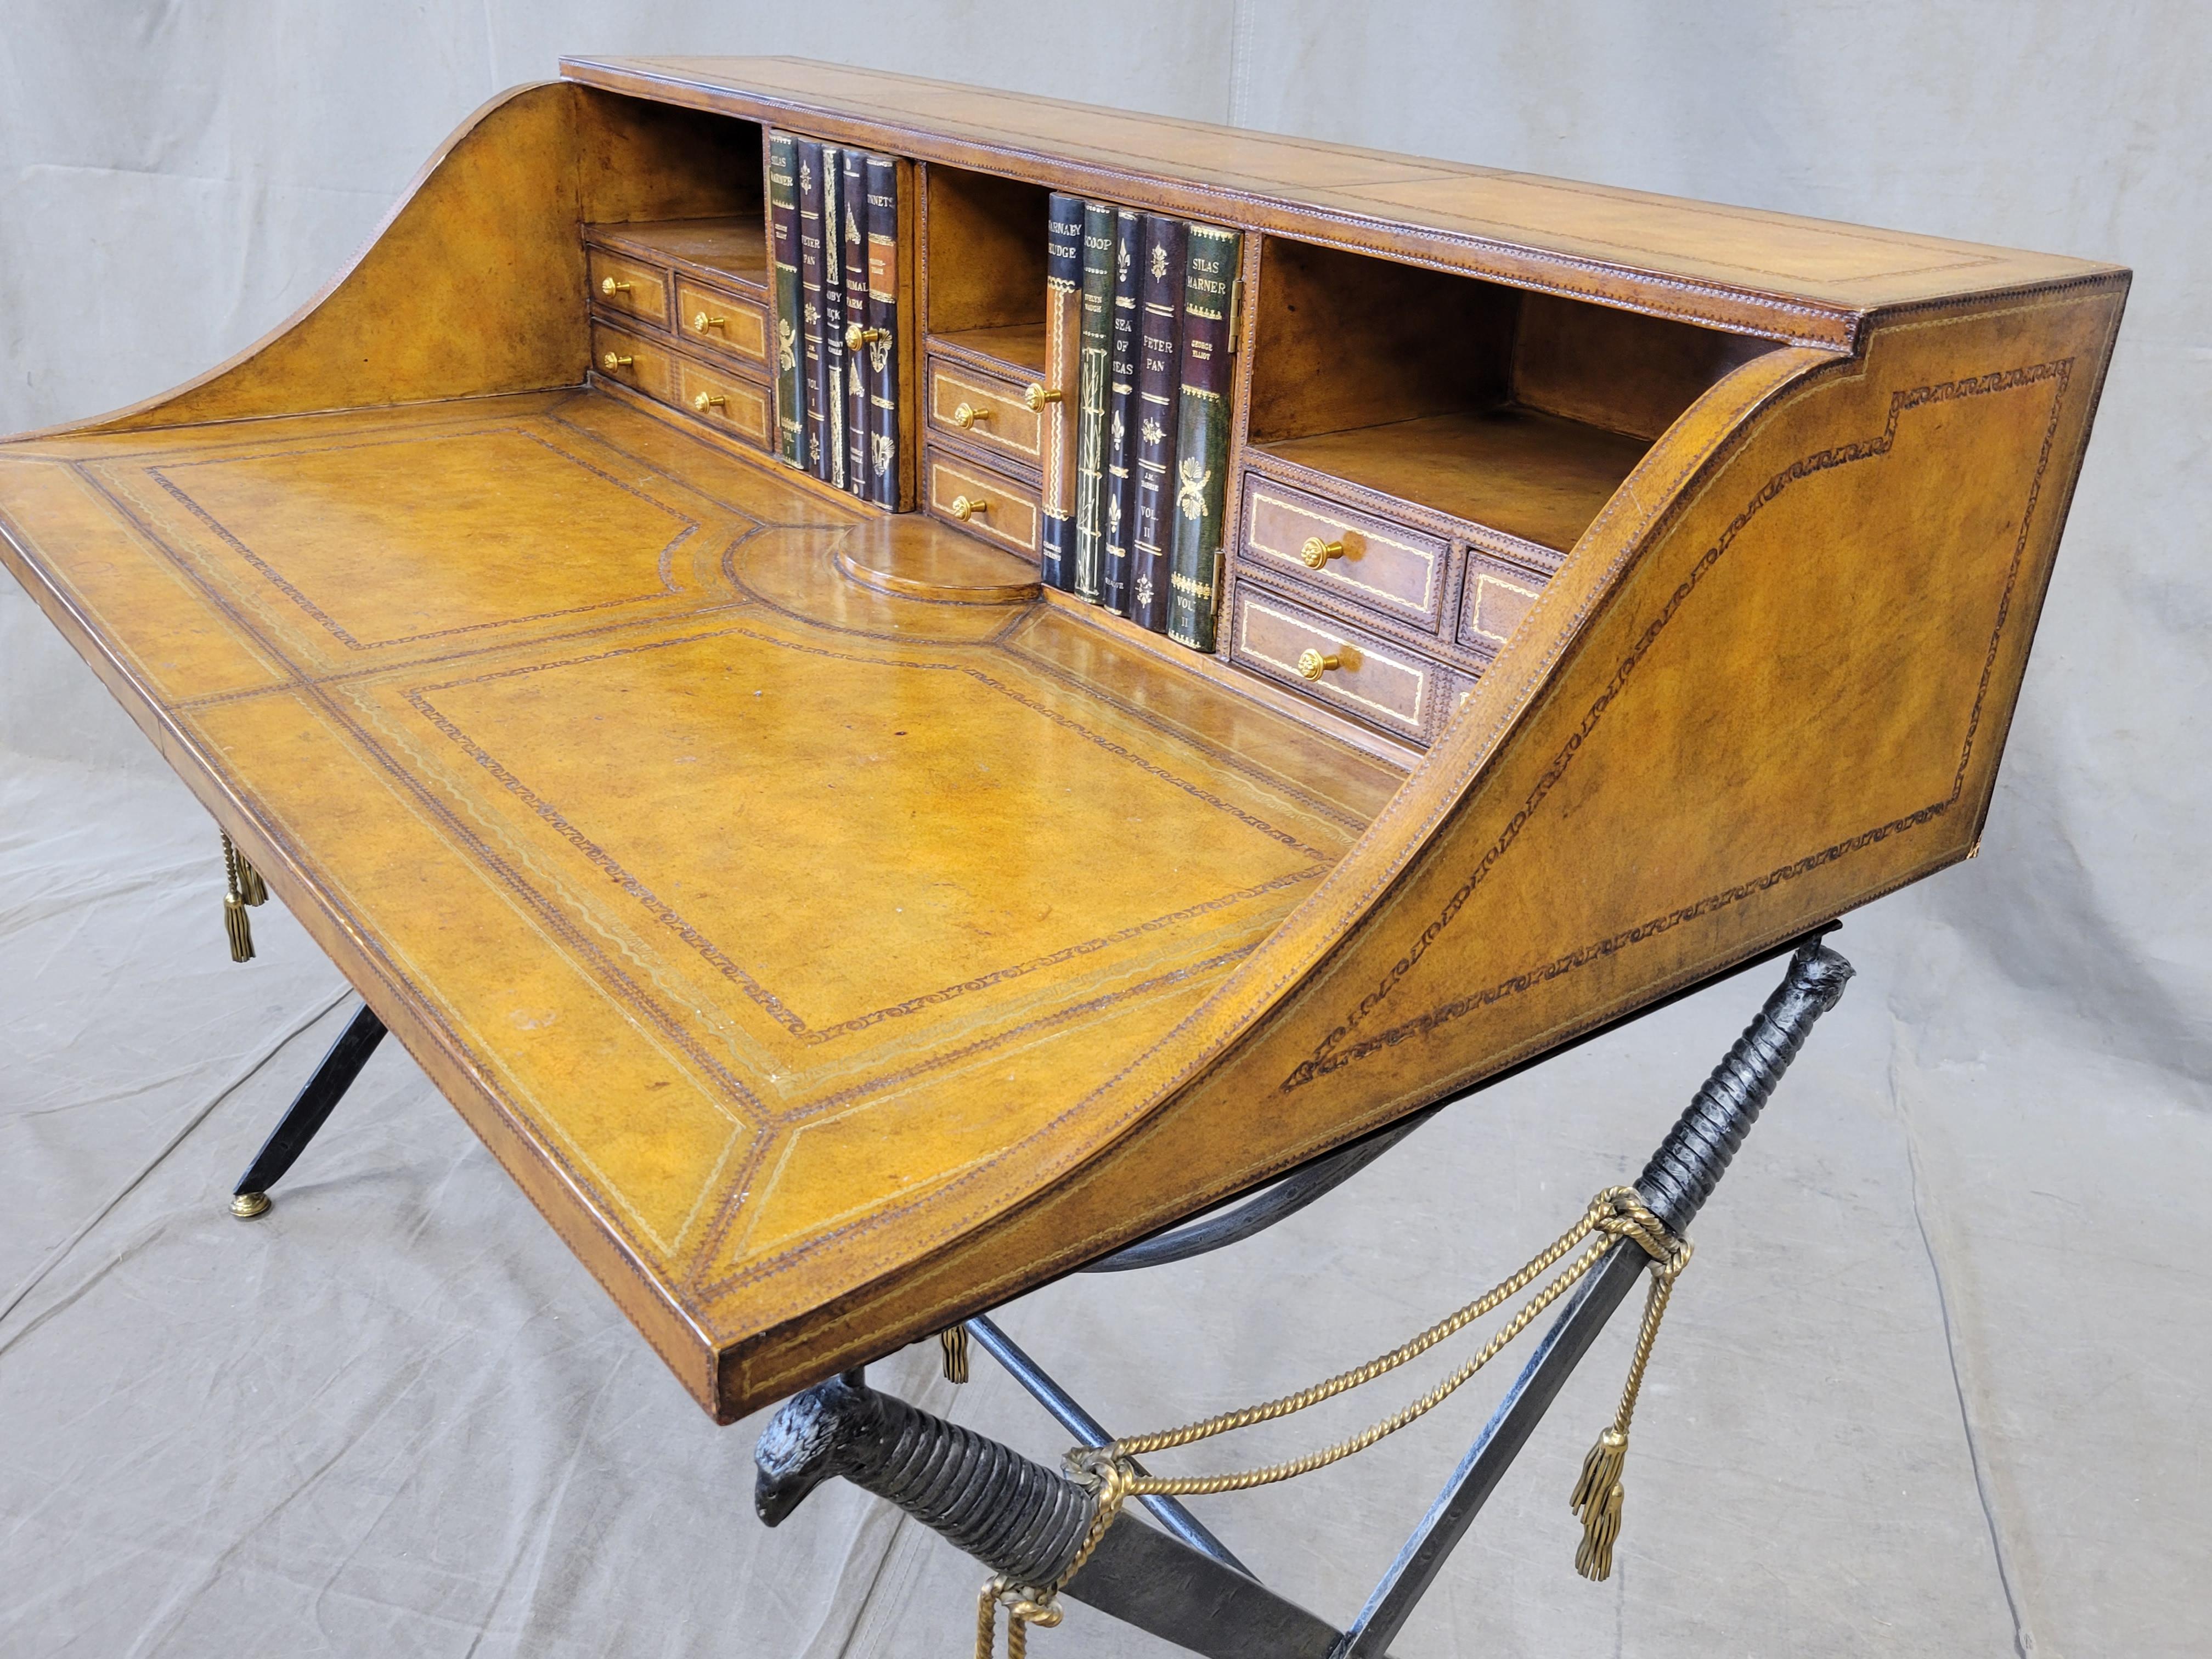 British Colonial Vintage Maitland-Smith Leather Clad British Campaign Desk With Steel Sword Base